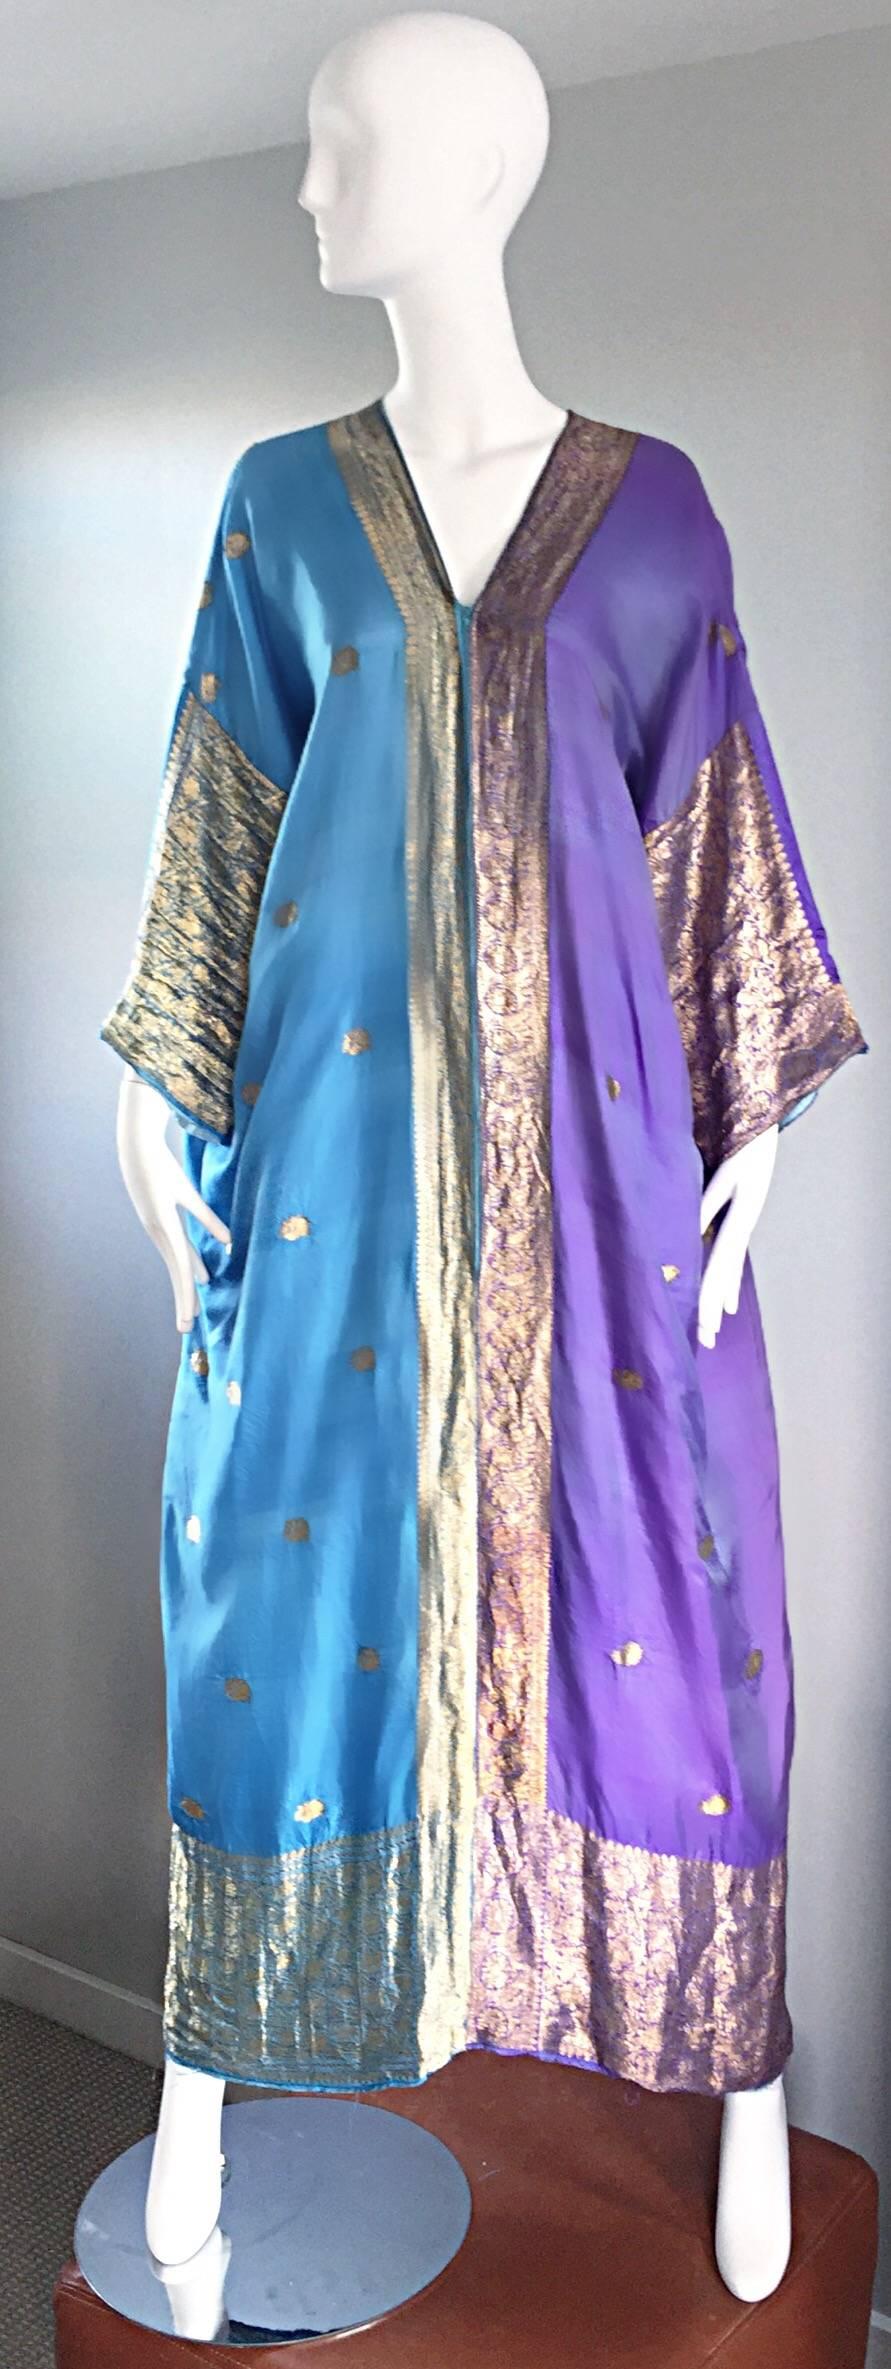 Incredible 1970s raw silk Indian inspired caftan maxi dress! Features the softest silk ever, with gold silk embroidery throughout. Light purple panels compliment the light blue panels. Hidden zipper up the front controls the amount of cleavage